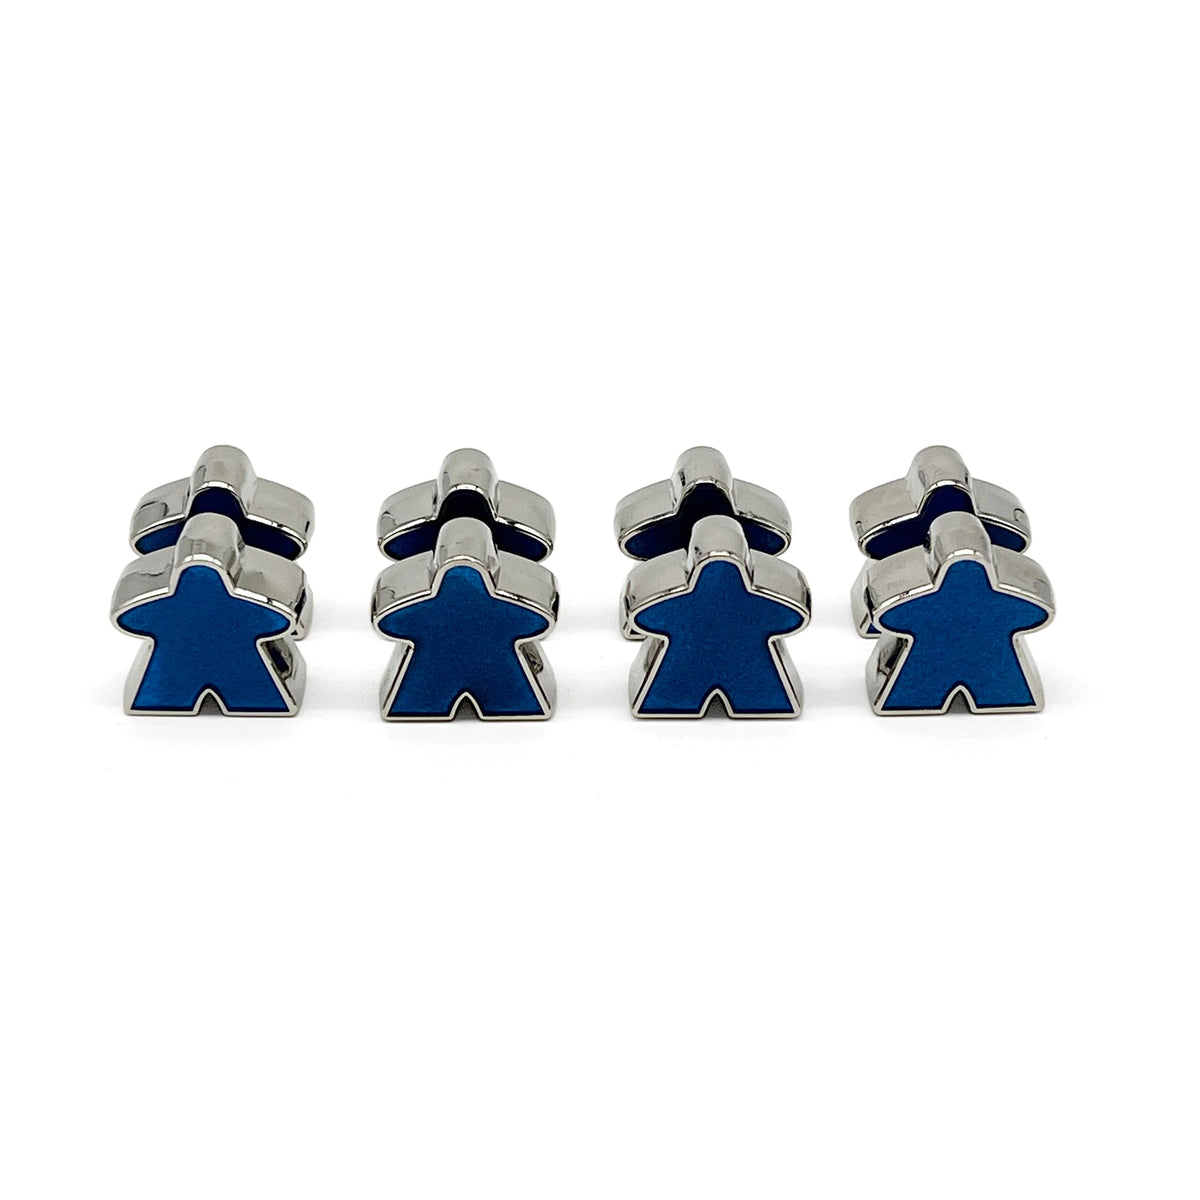 8 Pack of Blue Enamel Meeples by Norse Foundry - NOR 03474